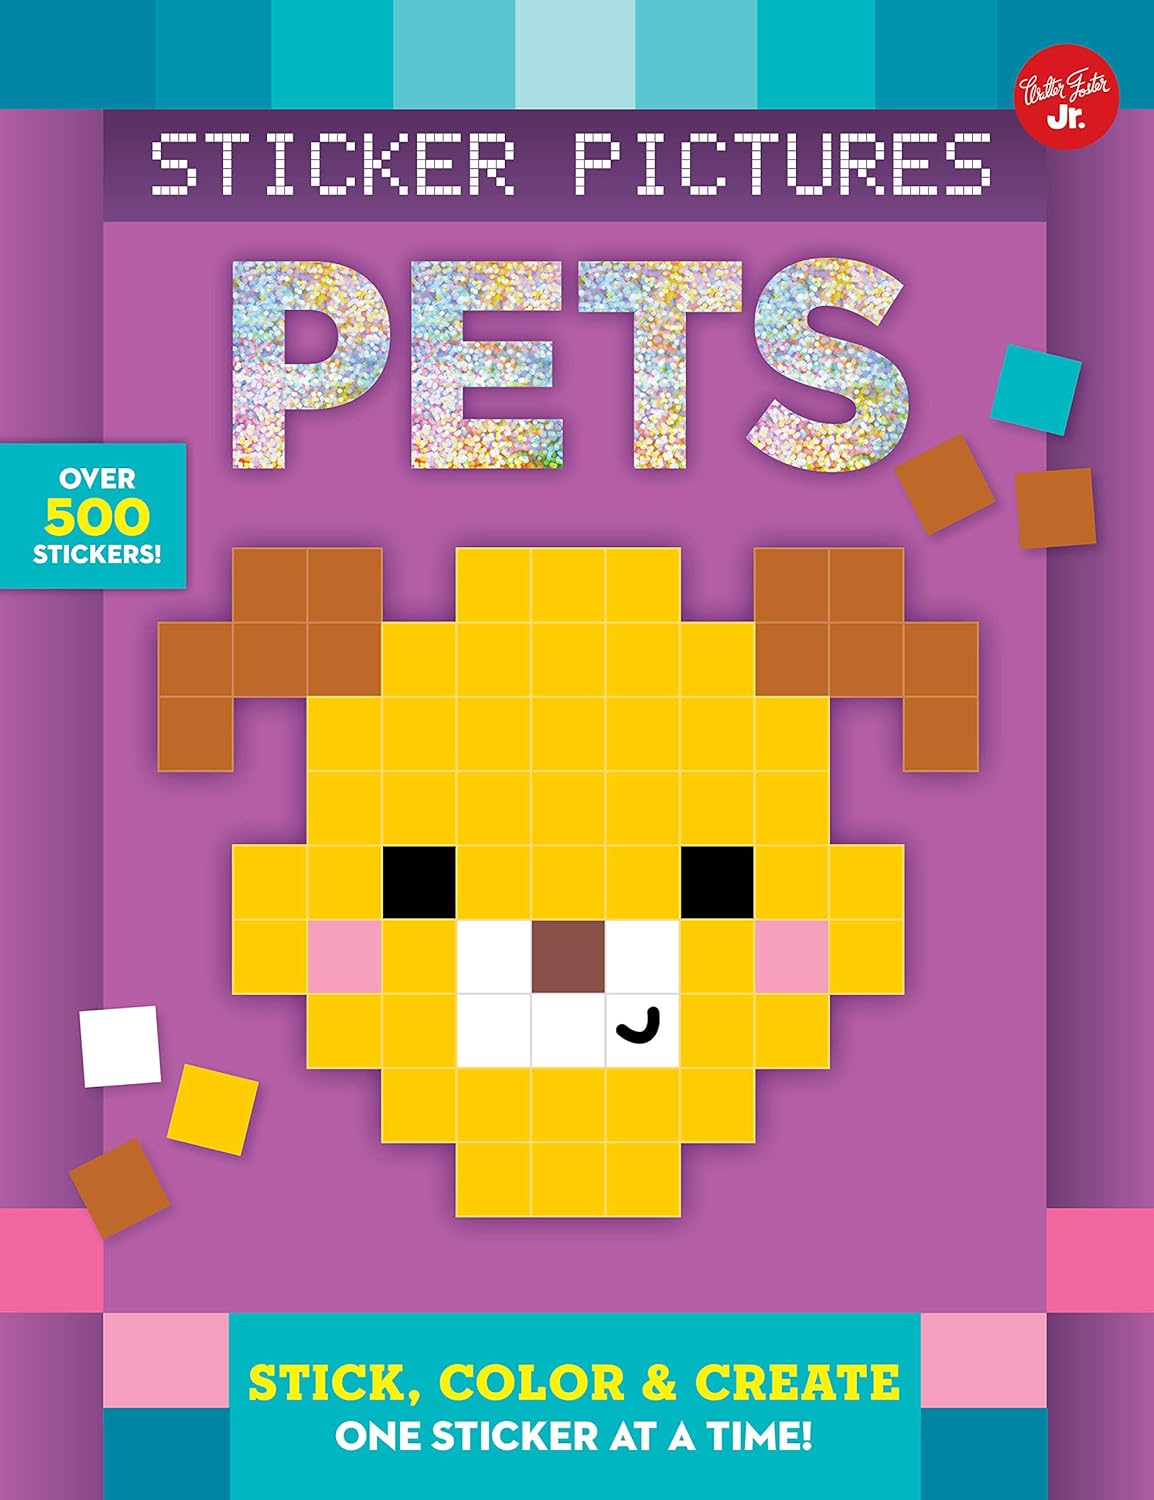 Sticker Pictures: Pets: Stick, color & create one sticker at a time! (Sticker & Color-by-Number) - Original